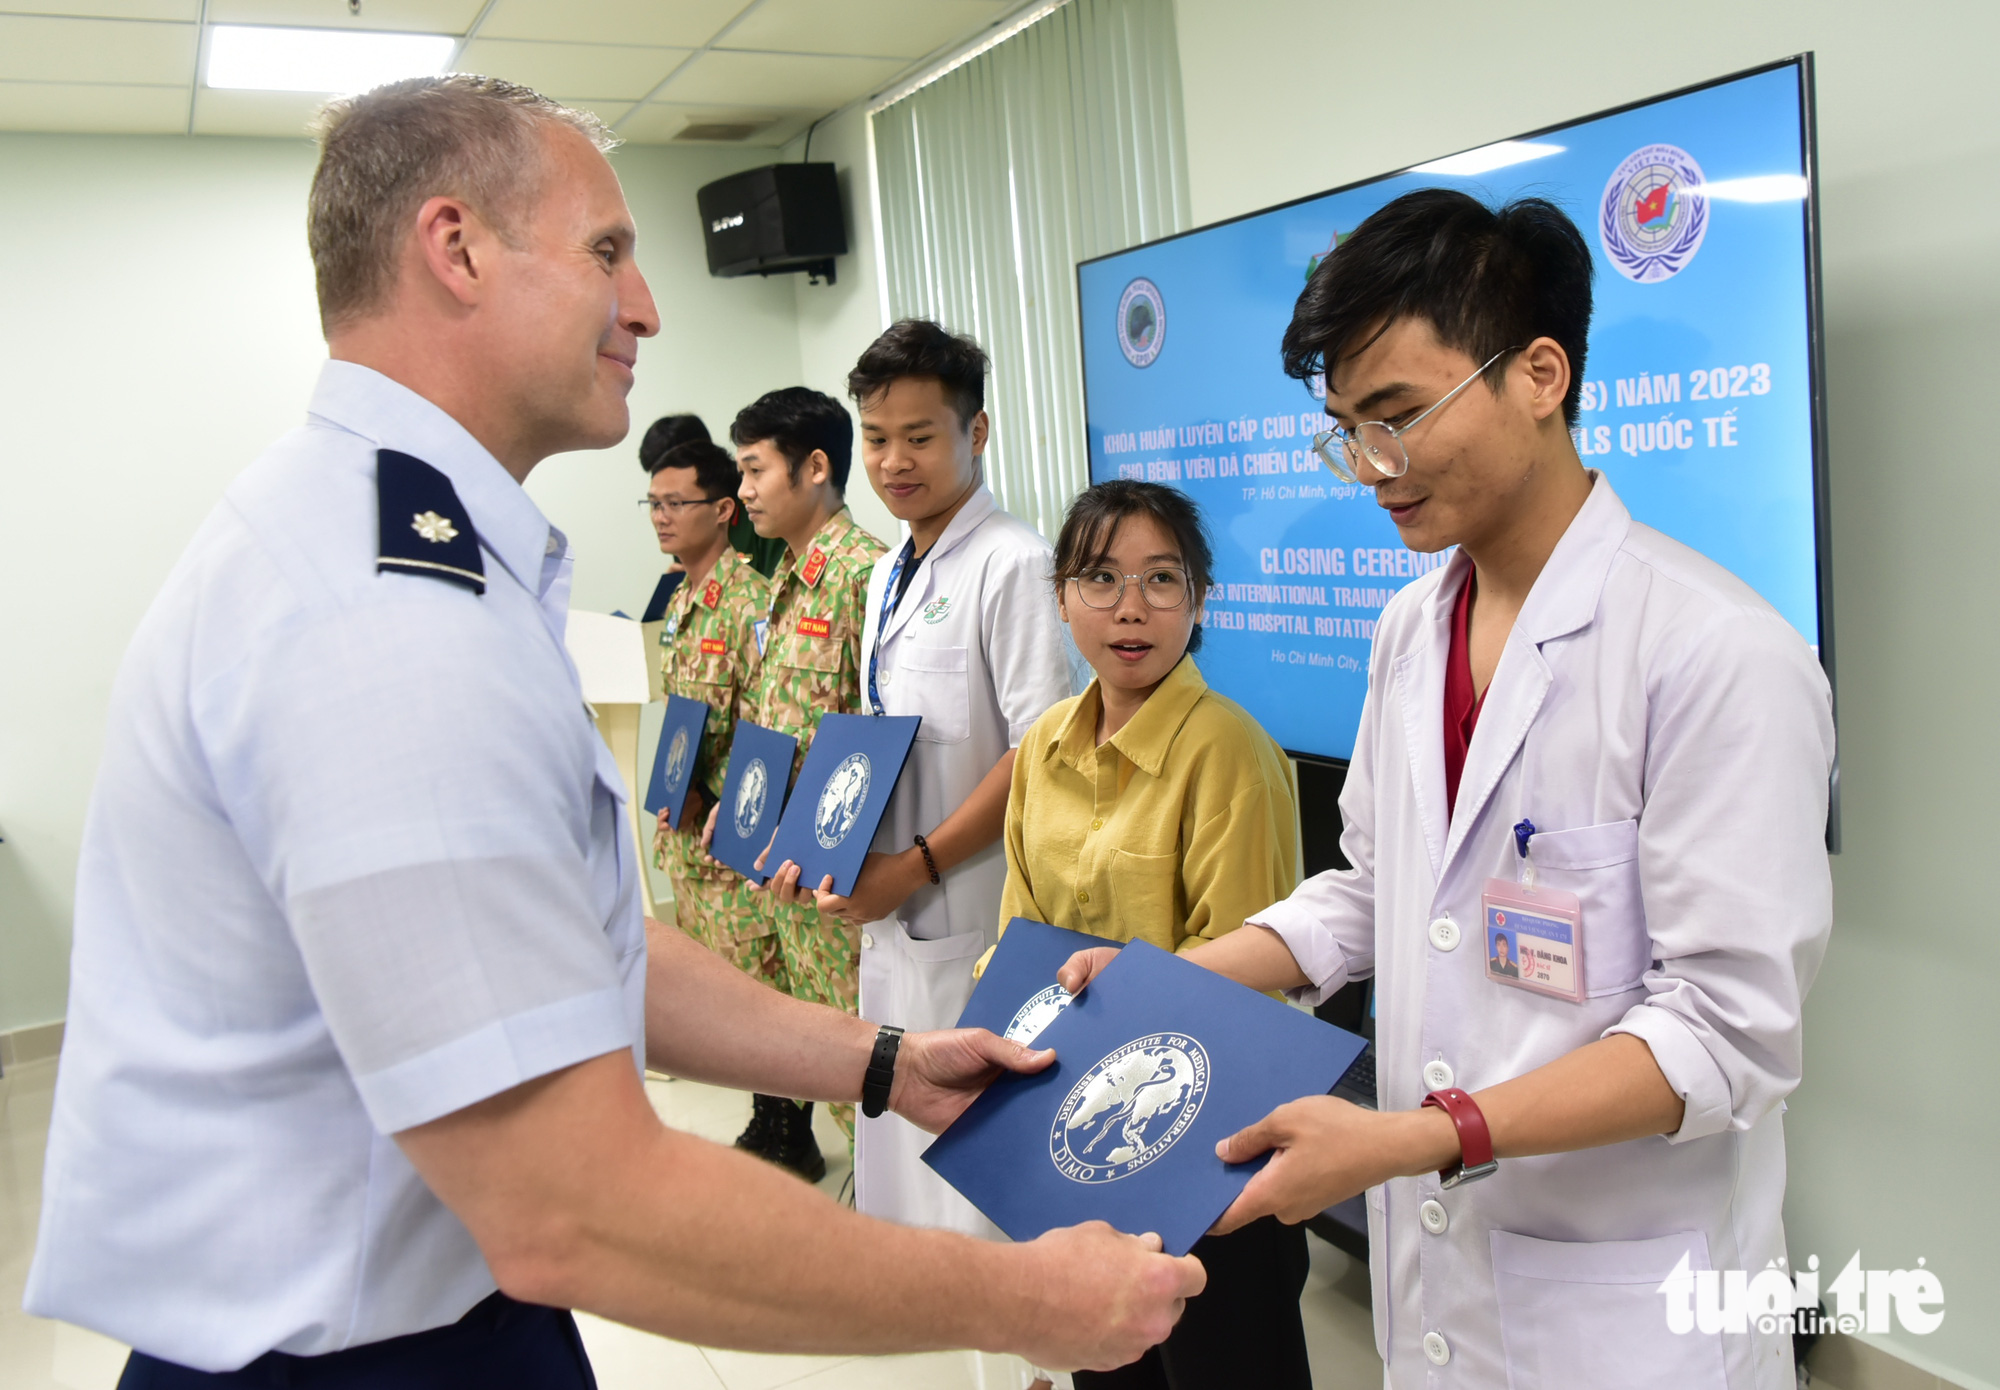 46 Vietnamese medical workers get int’l trauma life support certificates from US agency